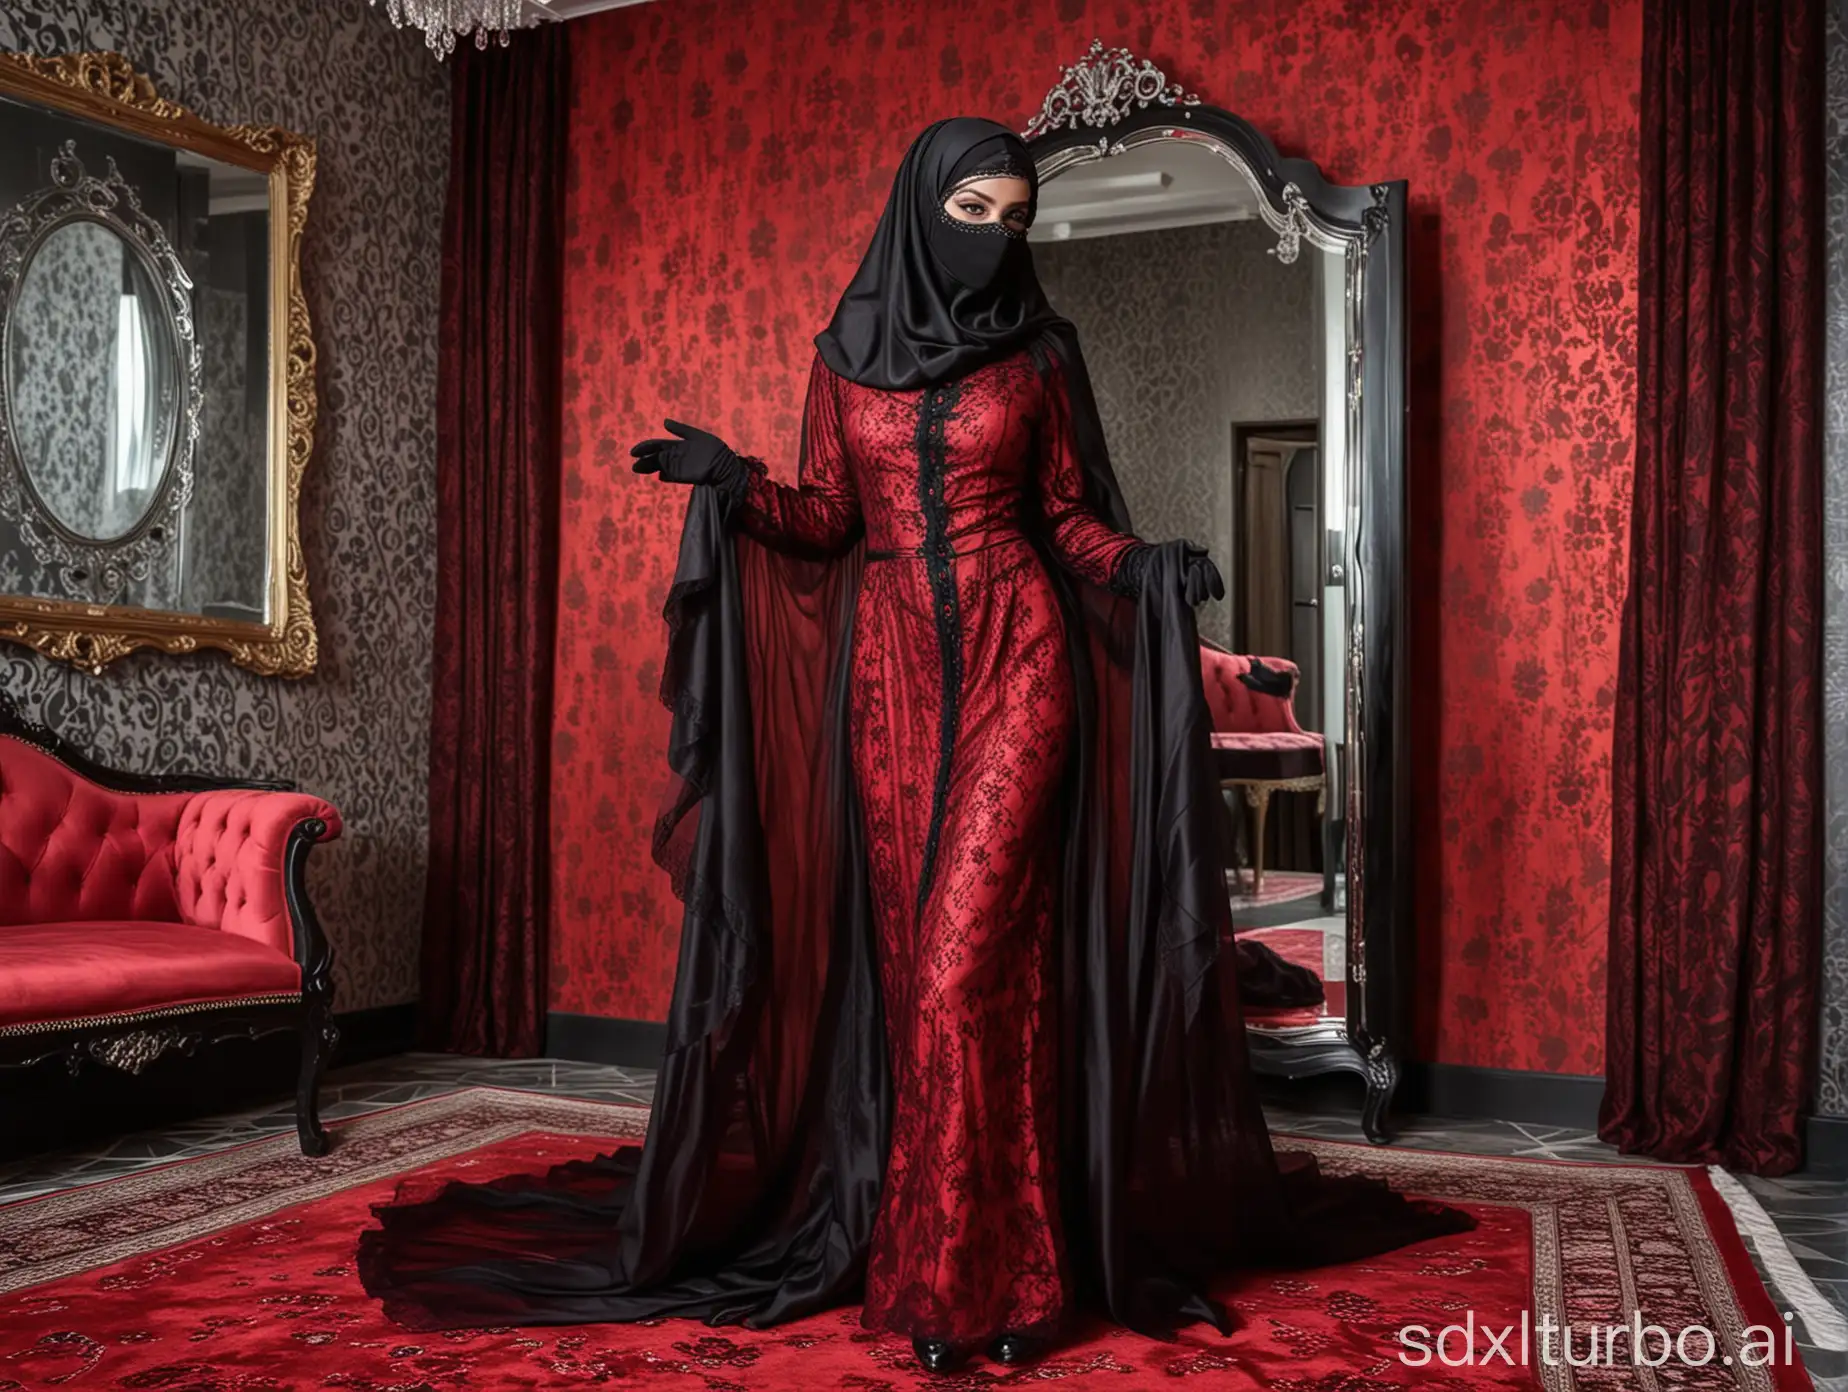 Transformed-Figure-in-Elegant-Room-with-Red-Abaya-and-Marble-Wall